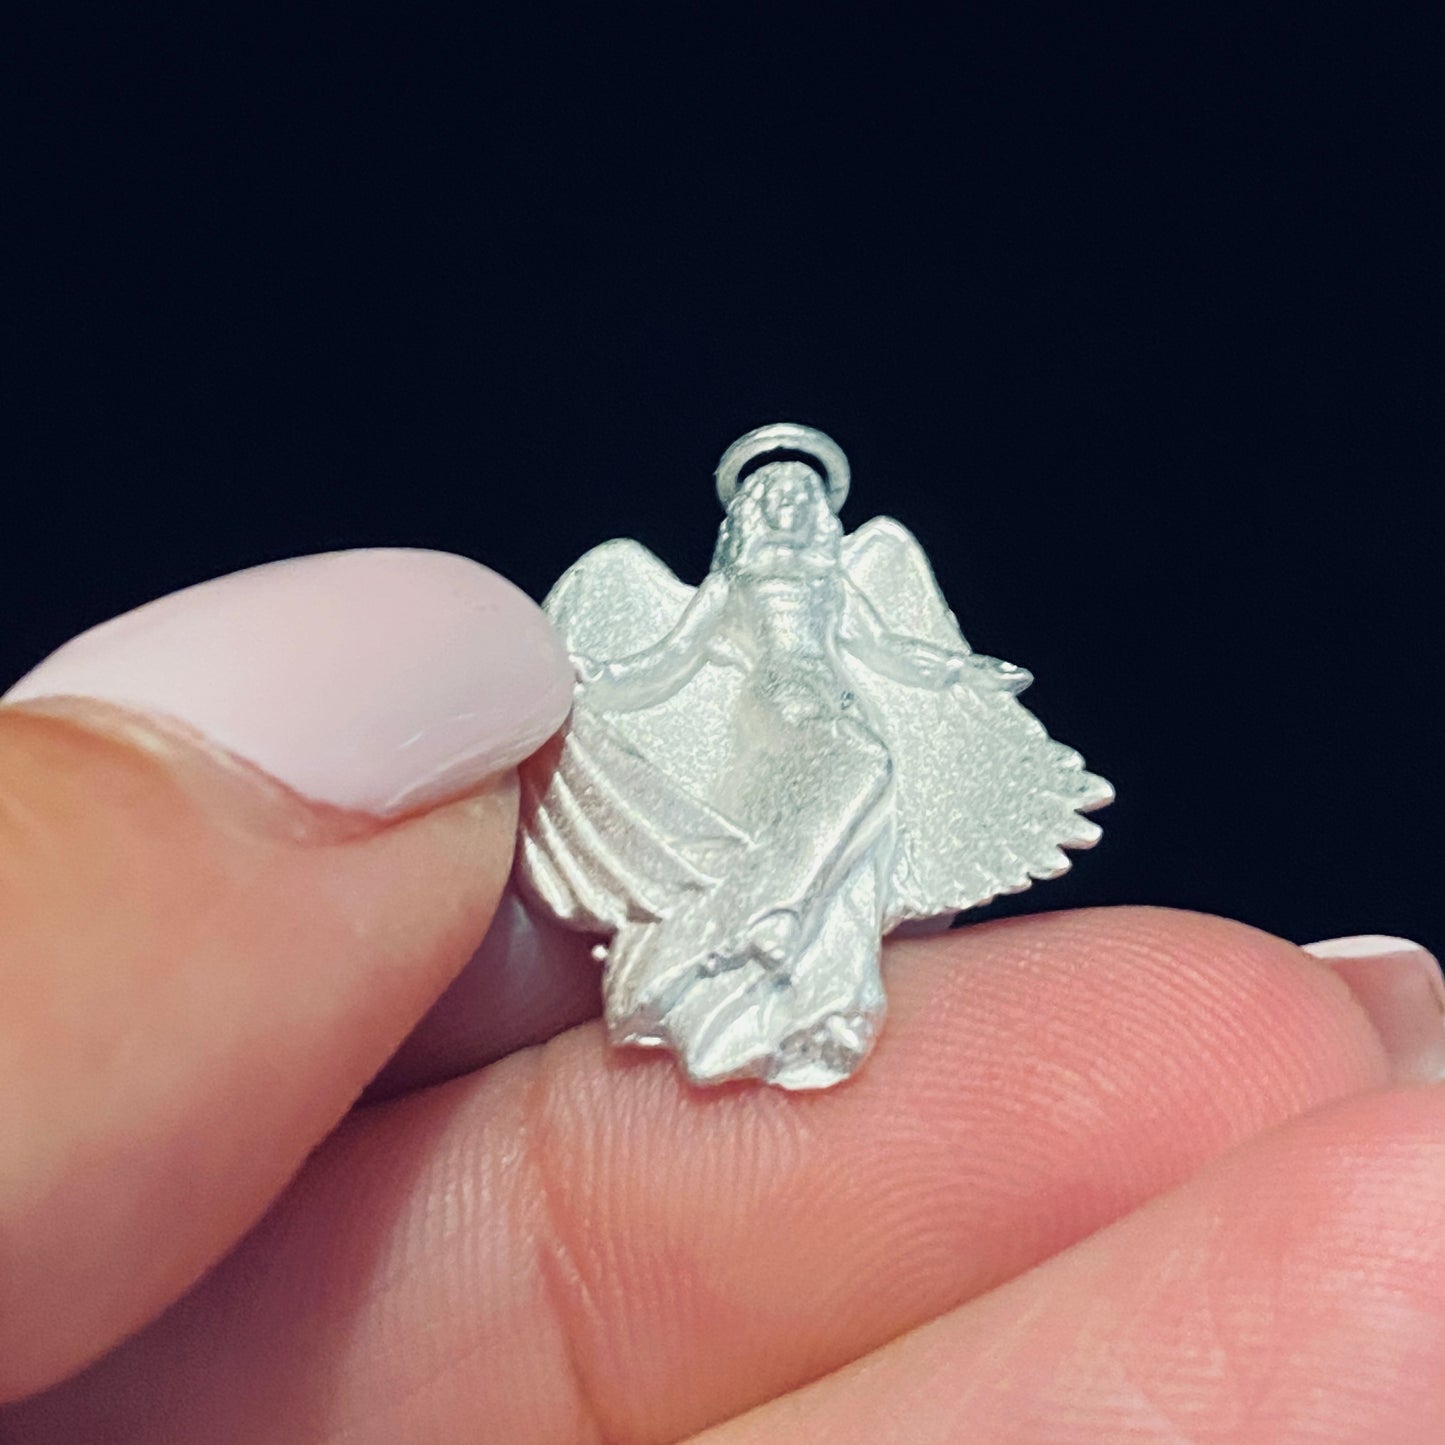 Angel Casting for Jewelry Design